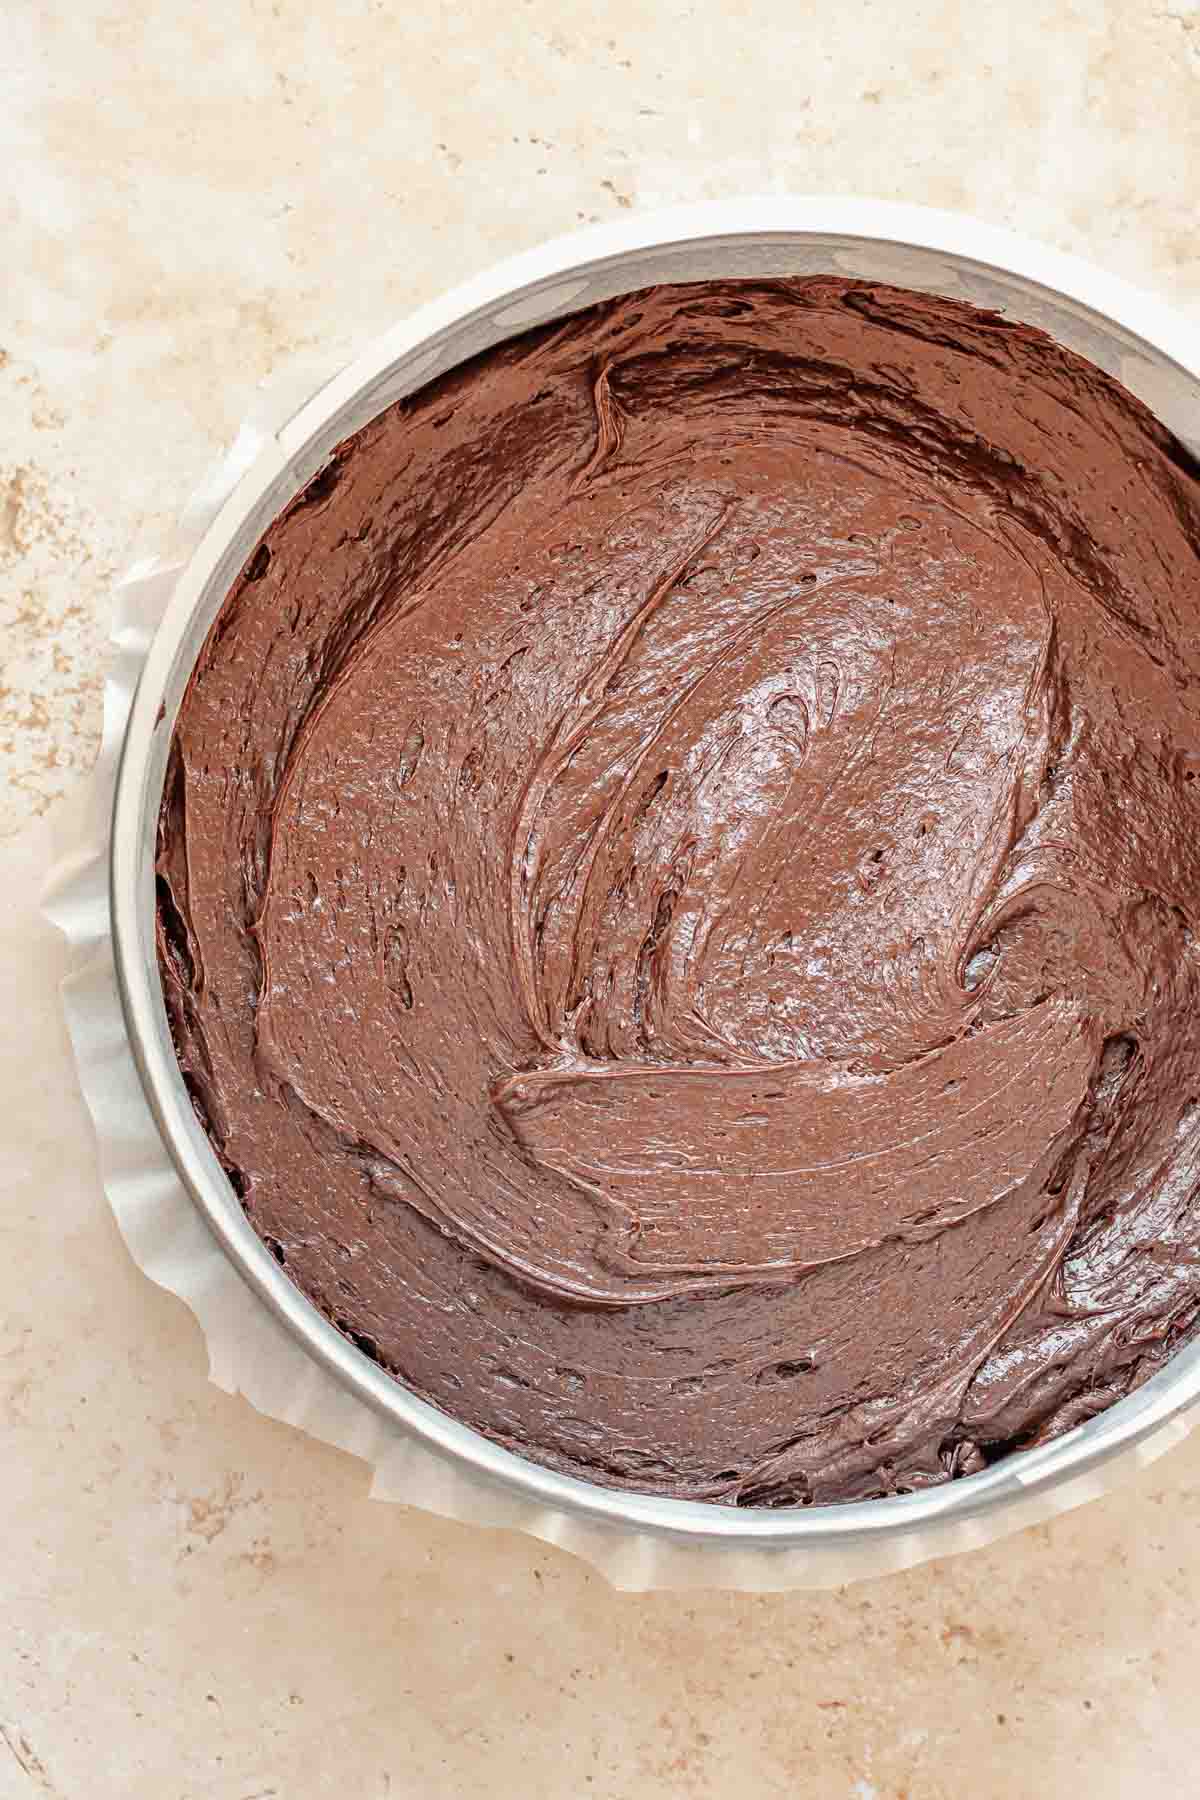 Chocolate cake batter in a springform pan pre-baked.